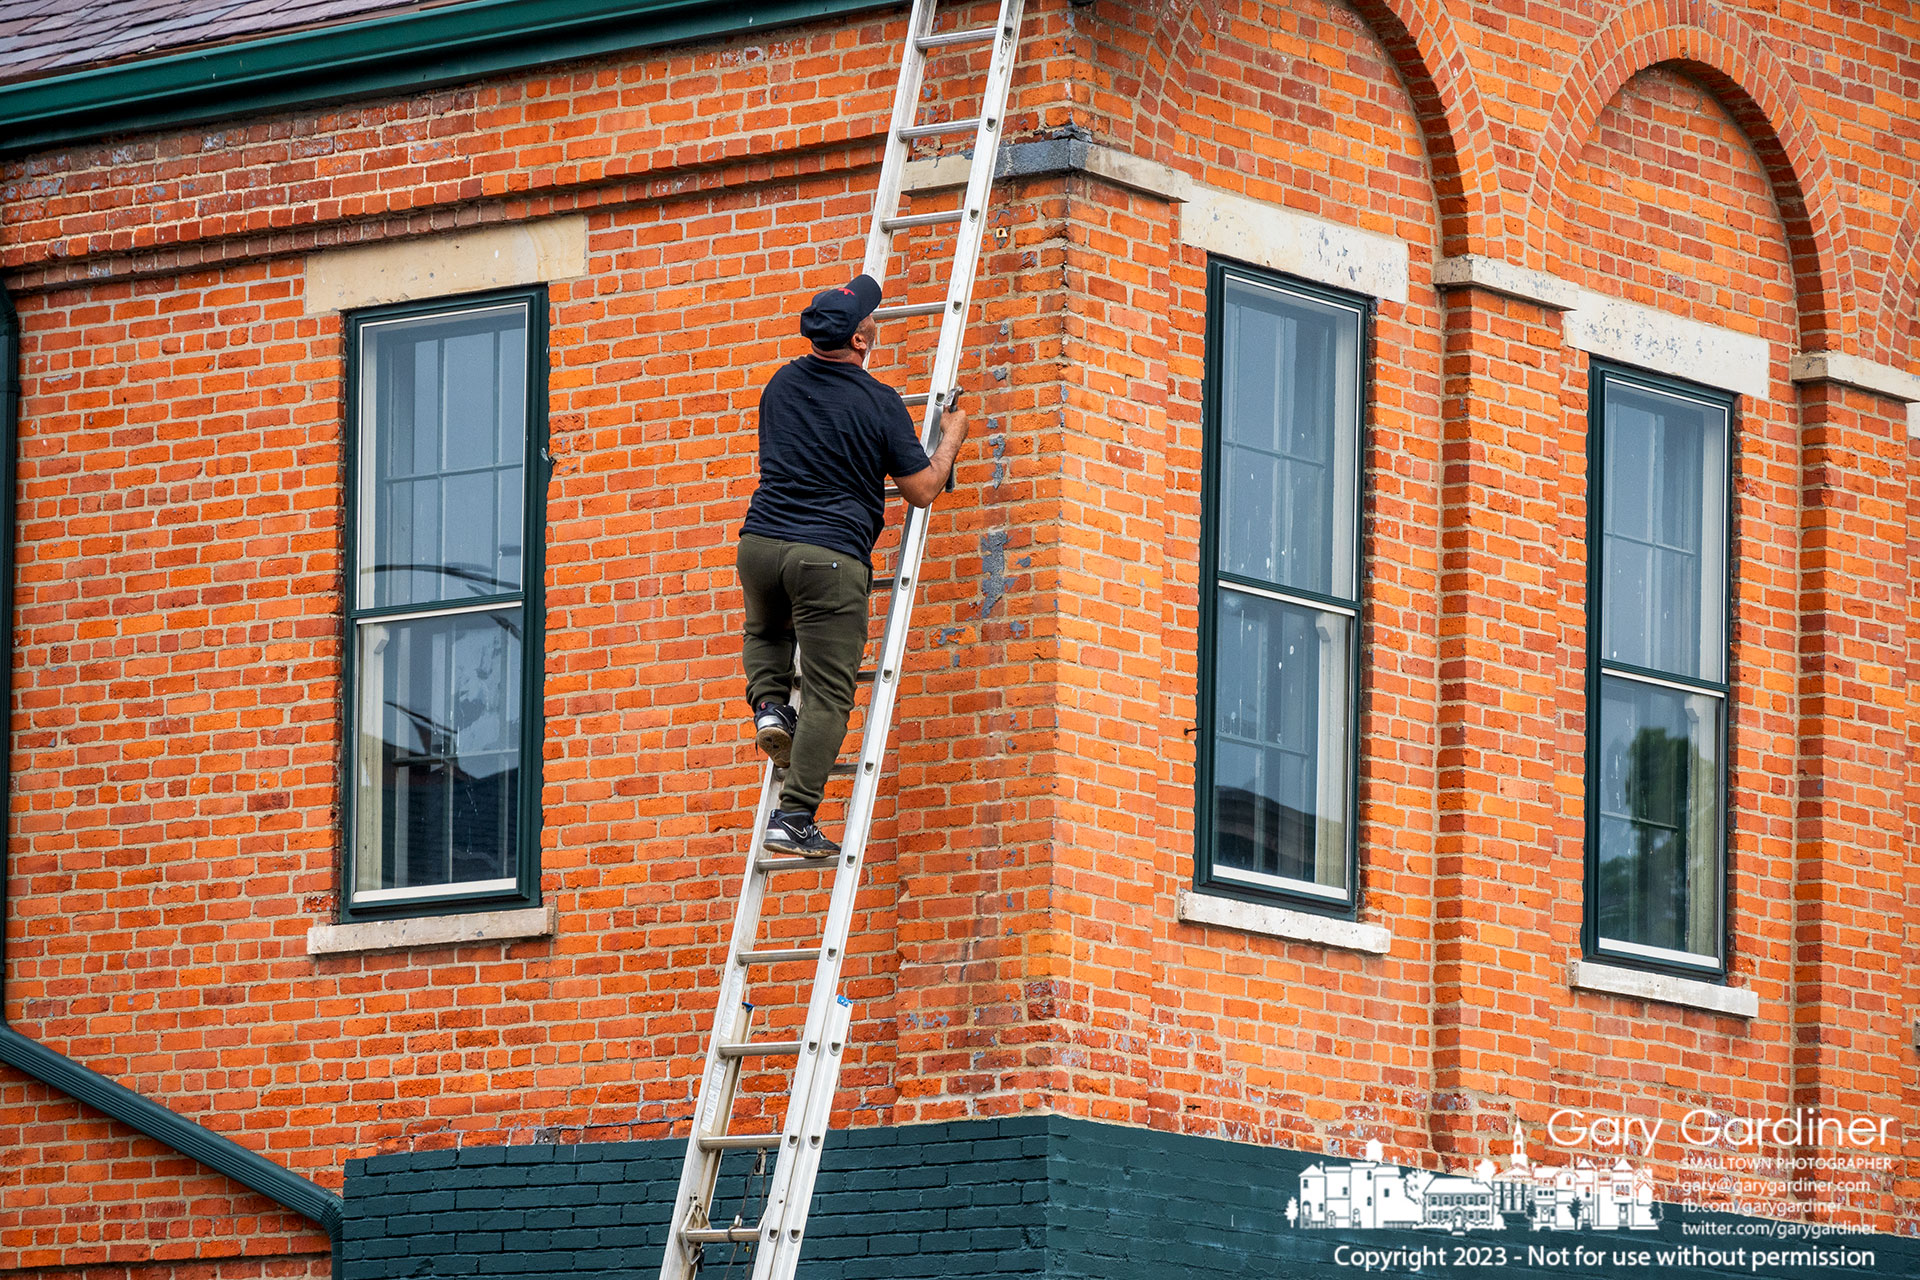 A repairman carrying a hammer checks his work after cleaning and repairing the gutter at the southeast corner of the building at State and Main with Morgan's Treasures as the first-floor business. My Final Photo for July 9, 2023.